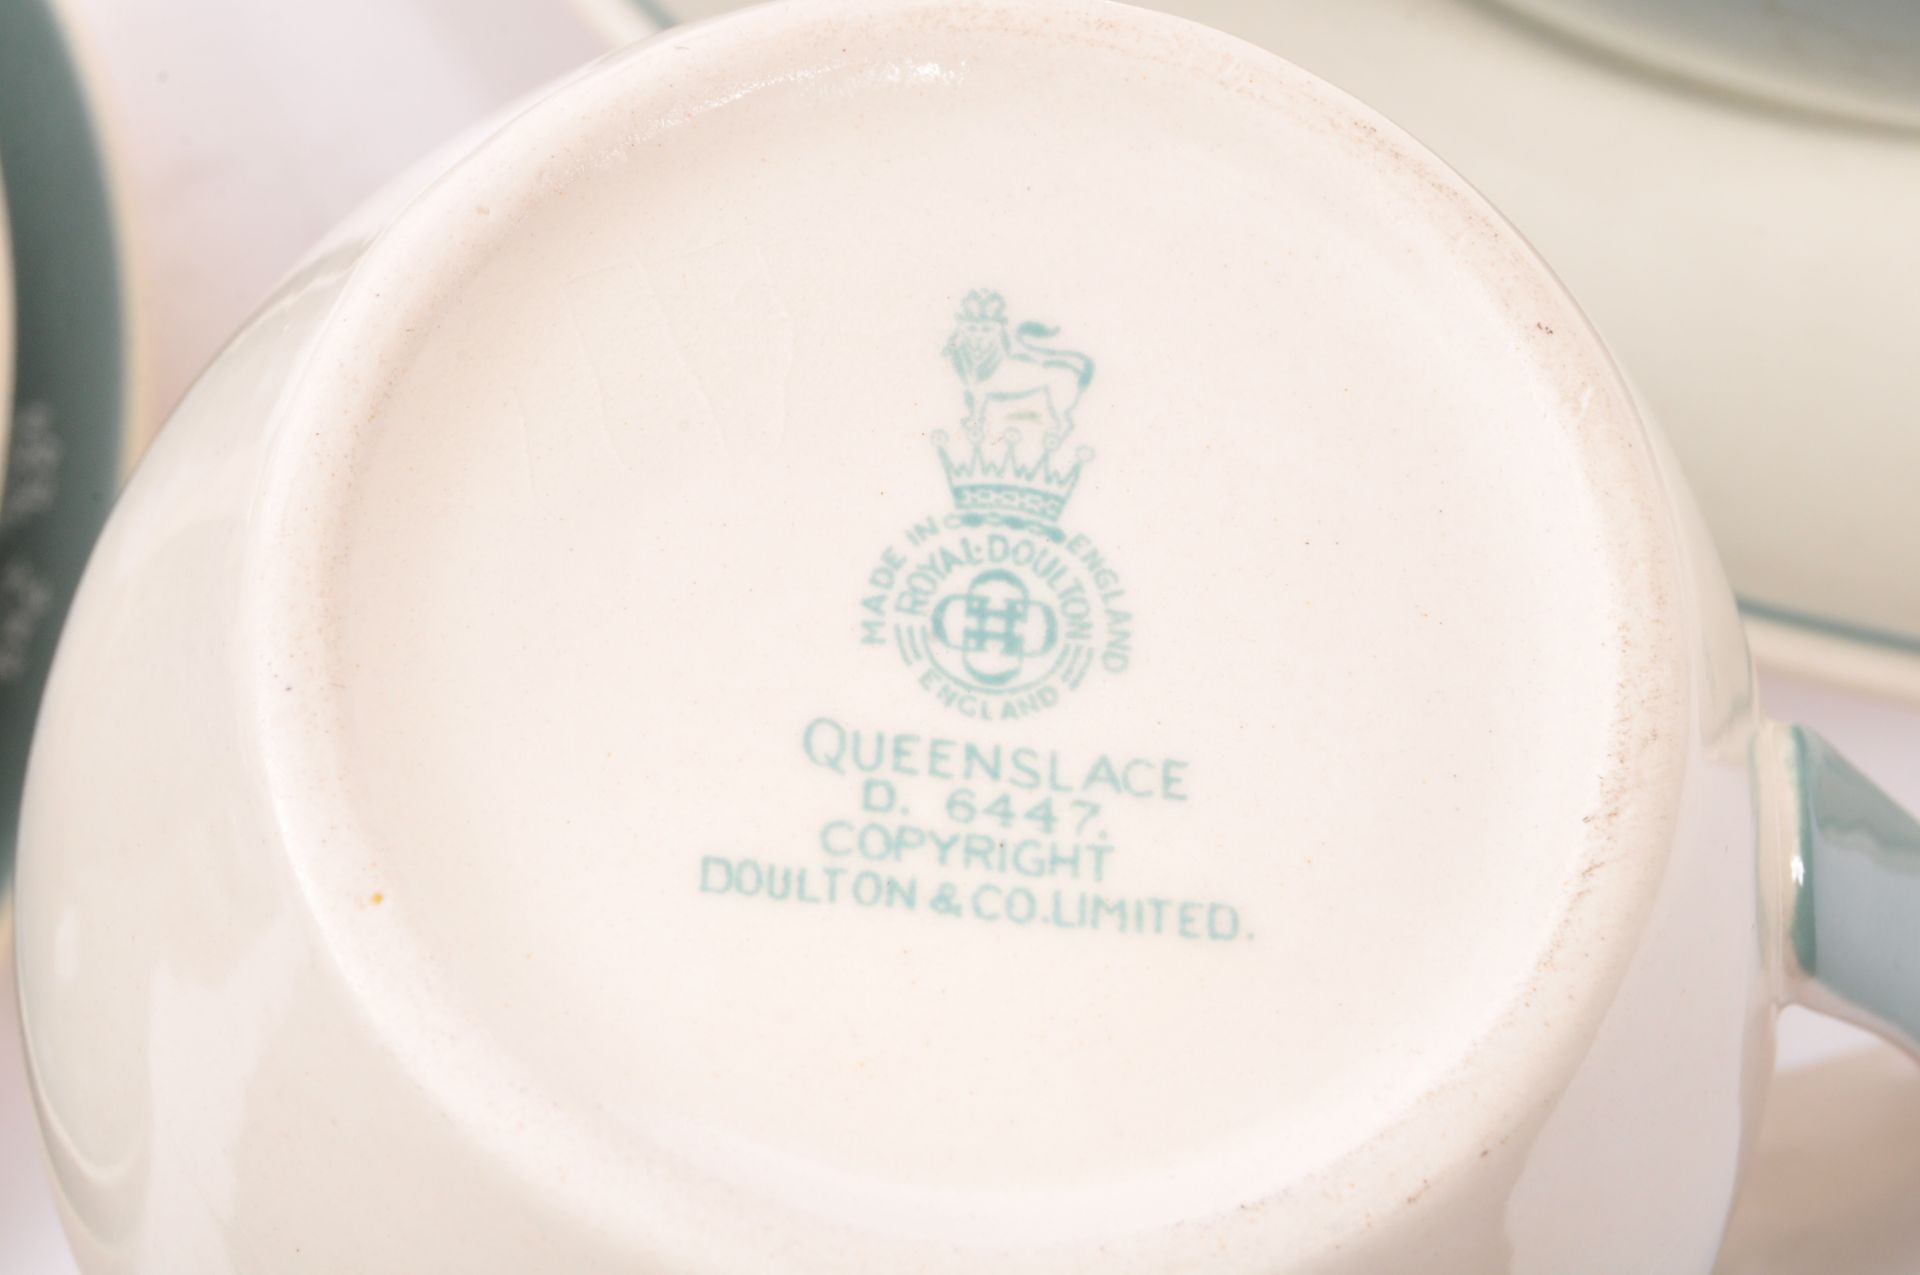 20TH CENTURY ROYAL DOULTON QUEENS LACE SERVICE - Image 9 of 9